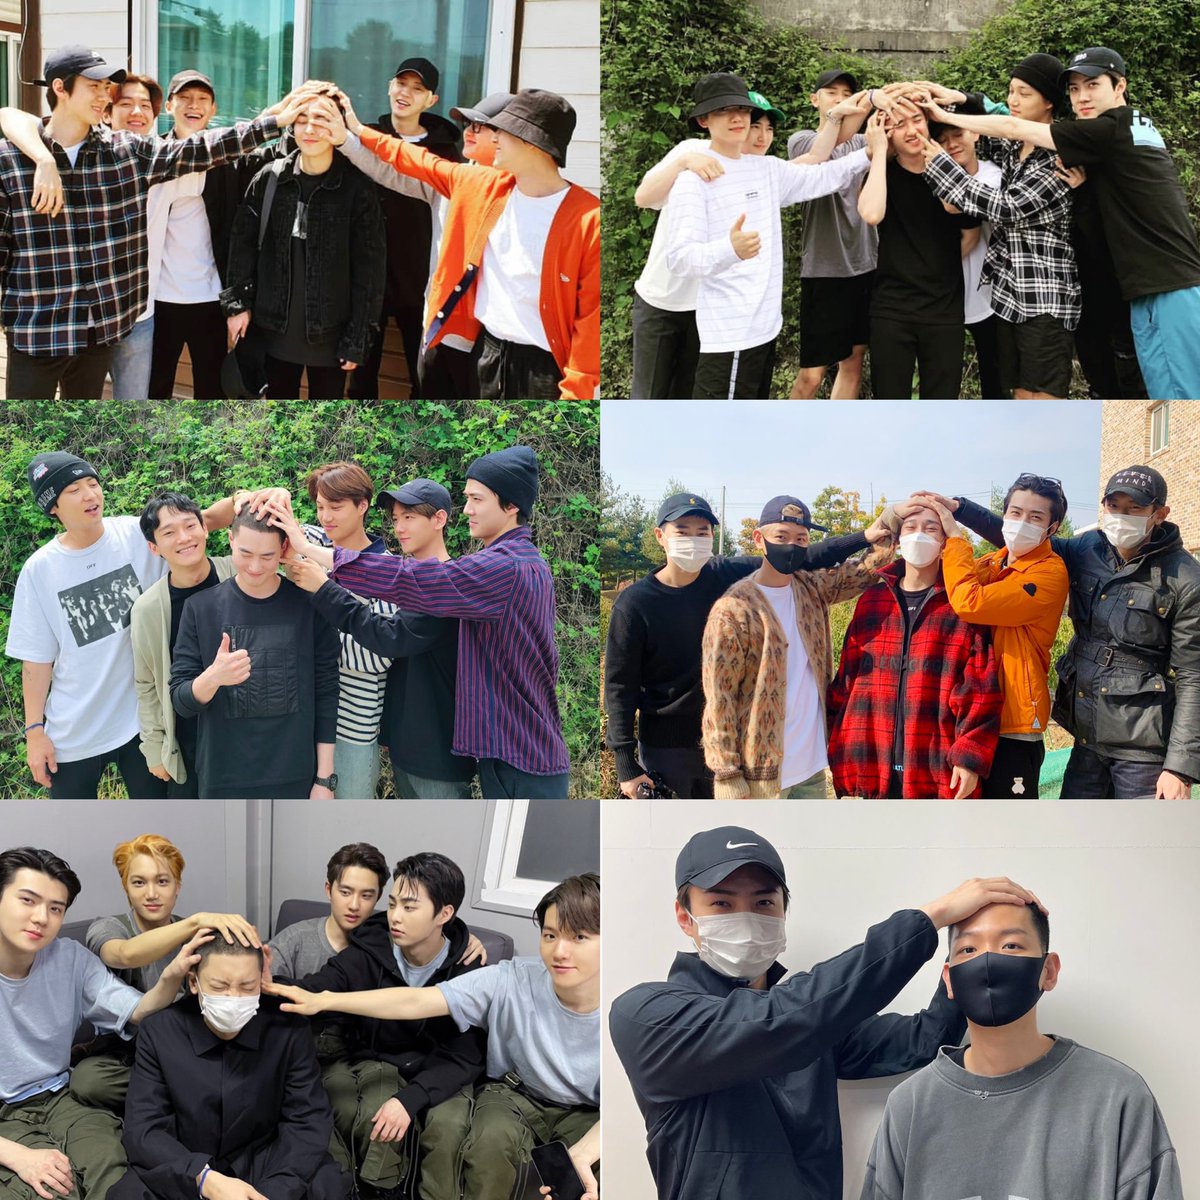 Always, We are one ♥️ #EXO #엑소 @weareoneEXO @B_hundred_Hyun @layzhang